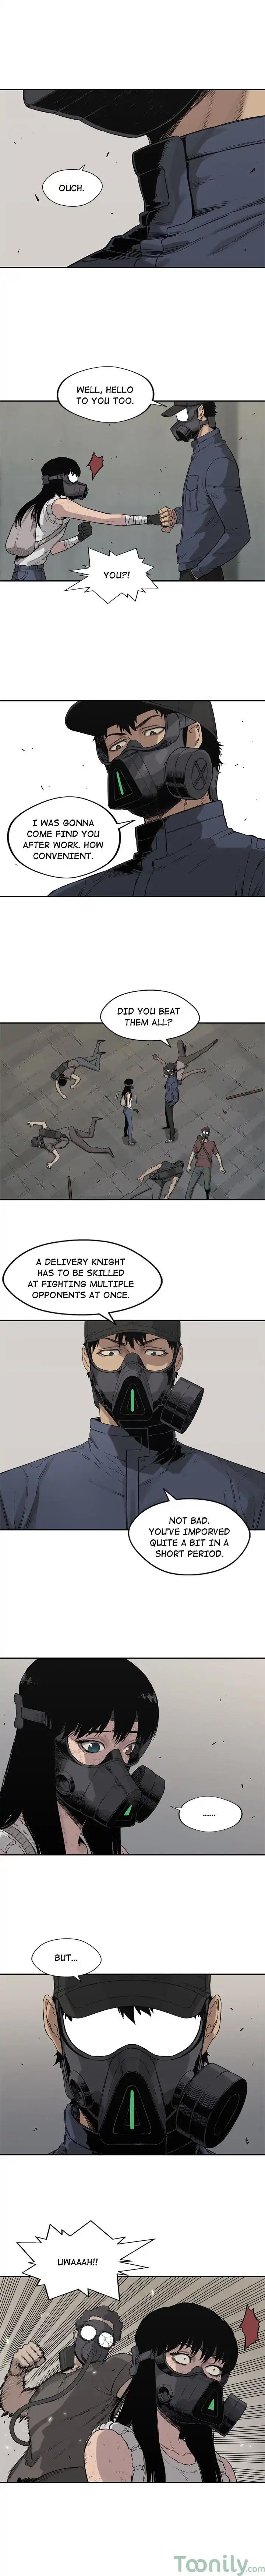 Delivery Knight Episode 47